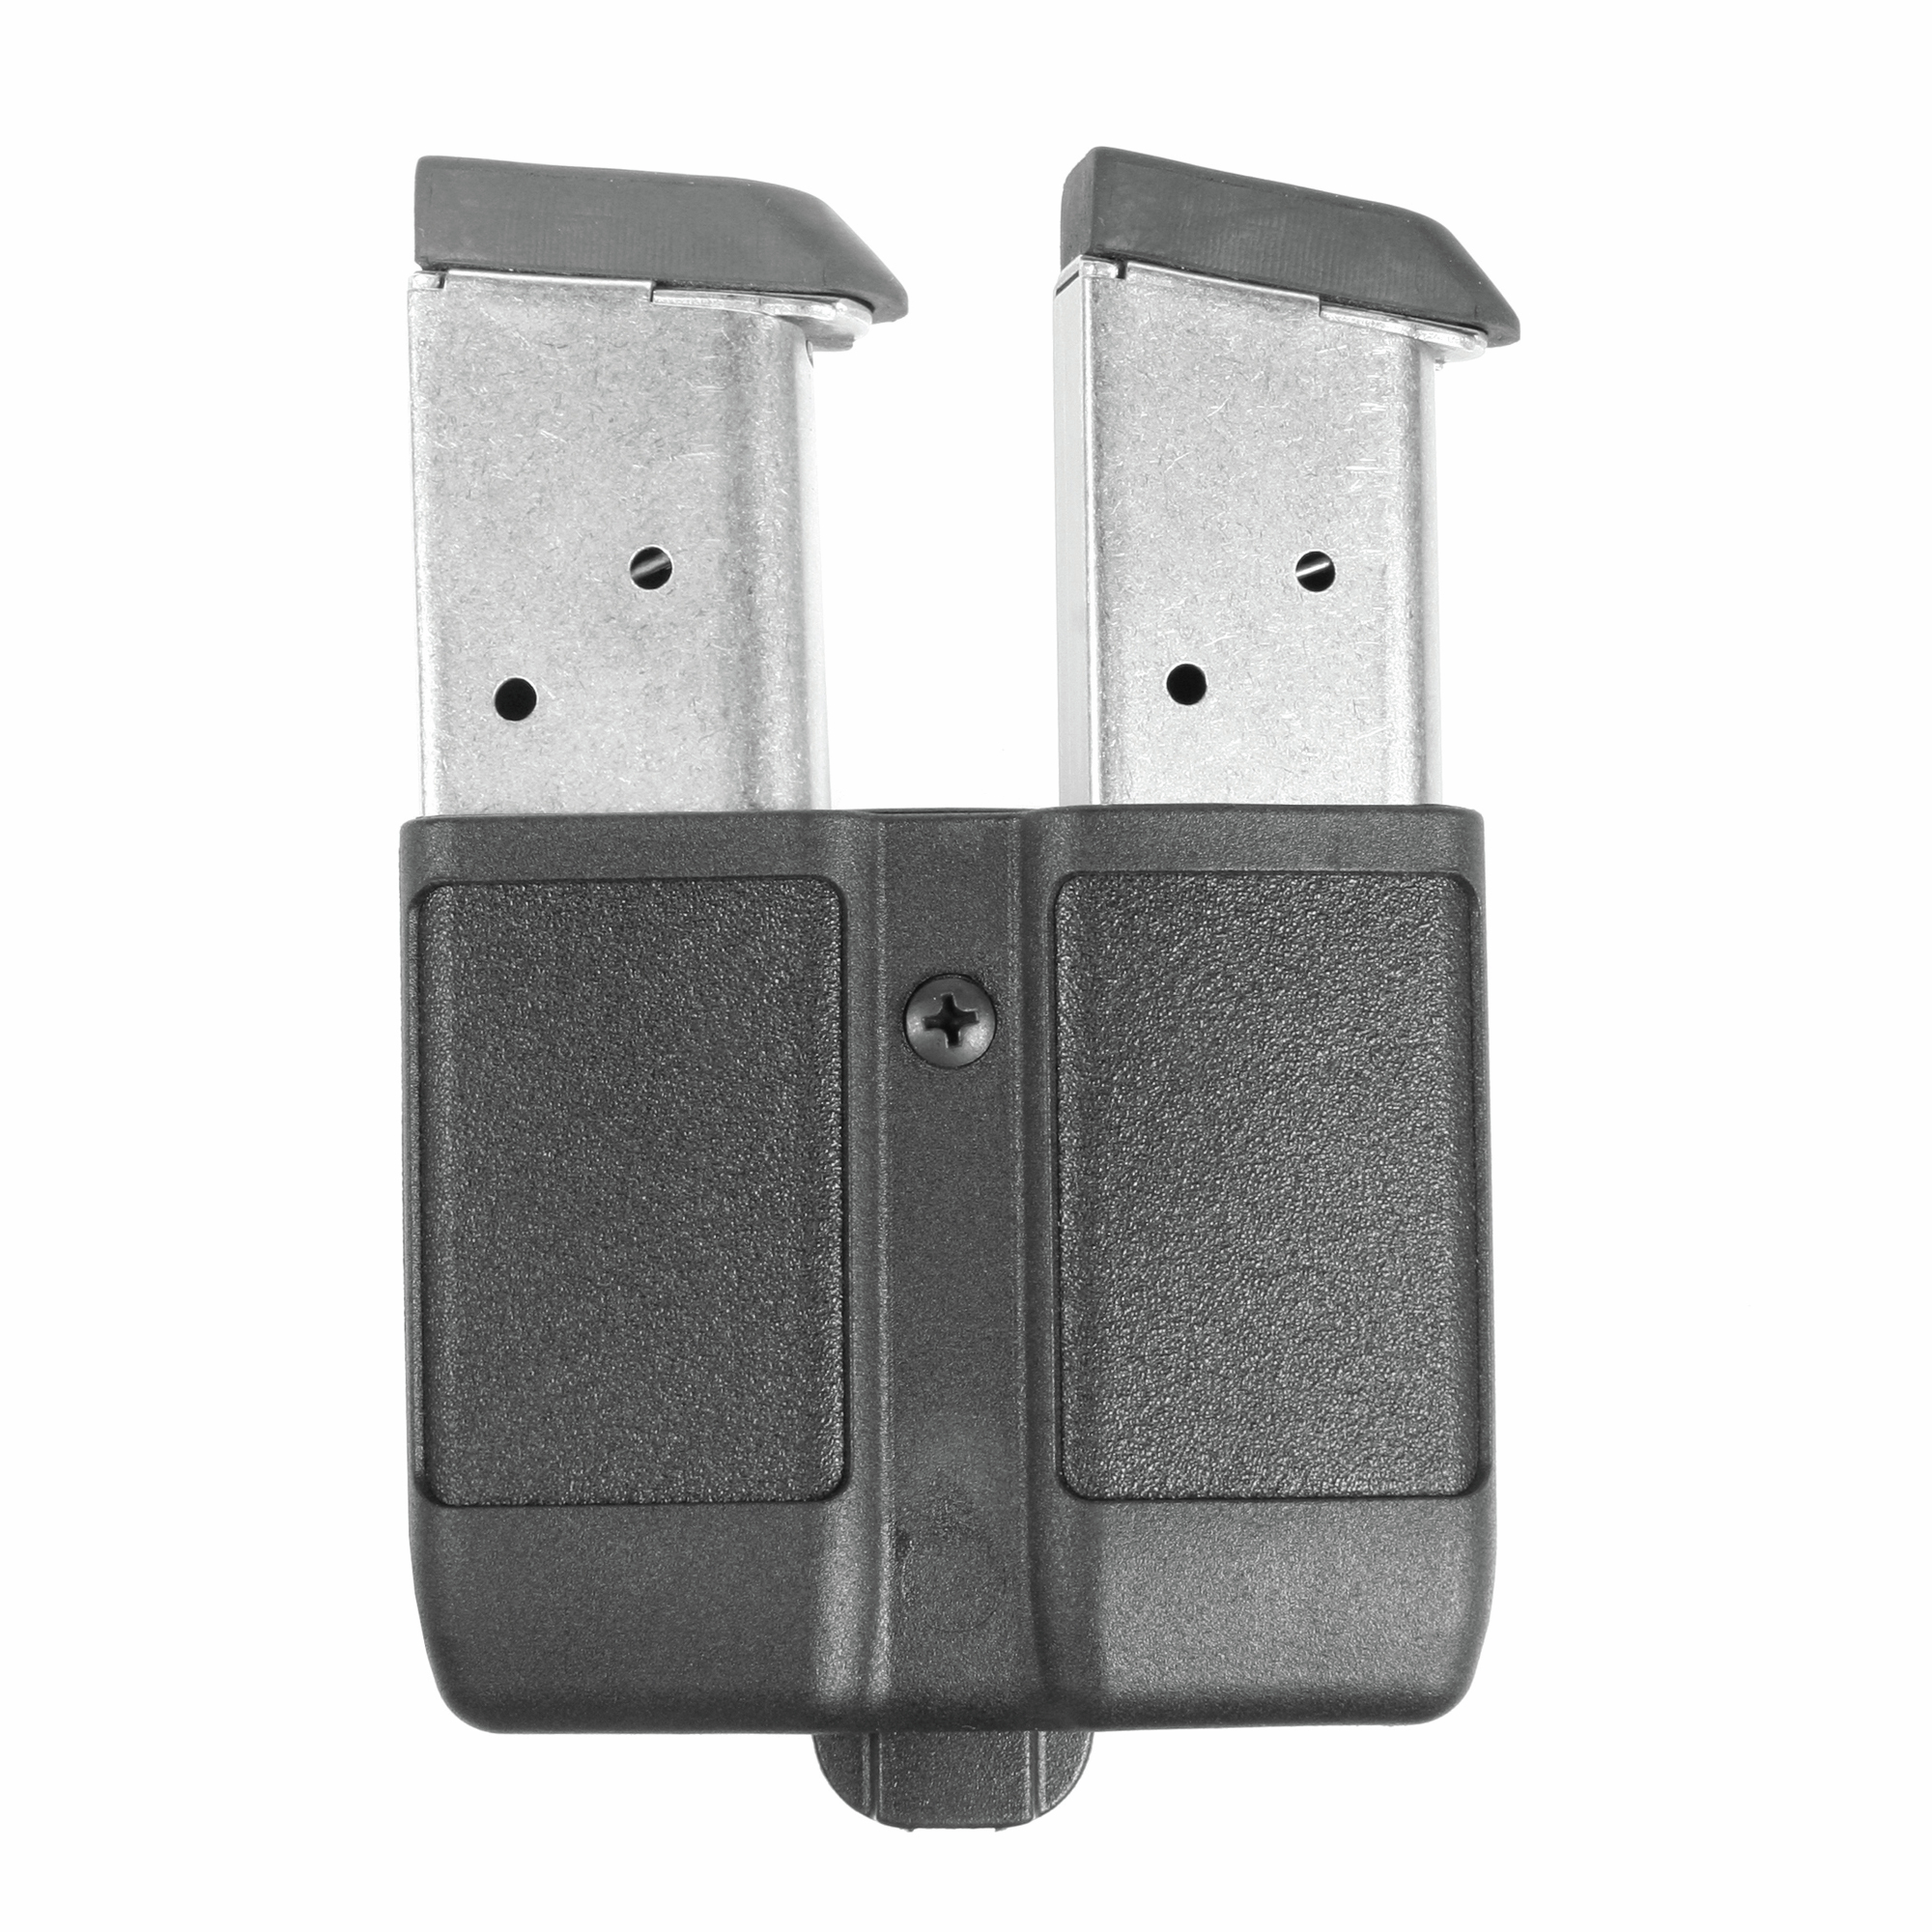 Tactical CQC Magazine Holster Double Stack Mag Holder for 9mm to .45 Caliber 